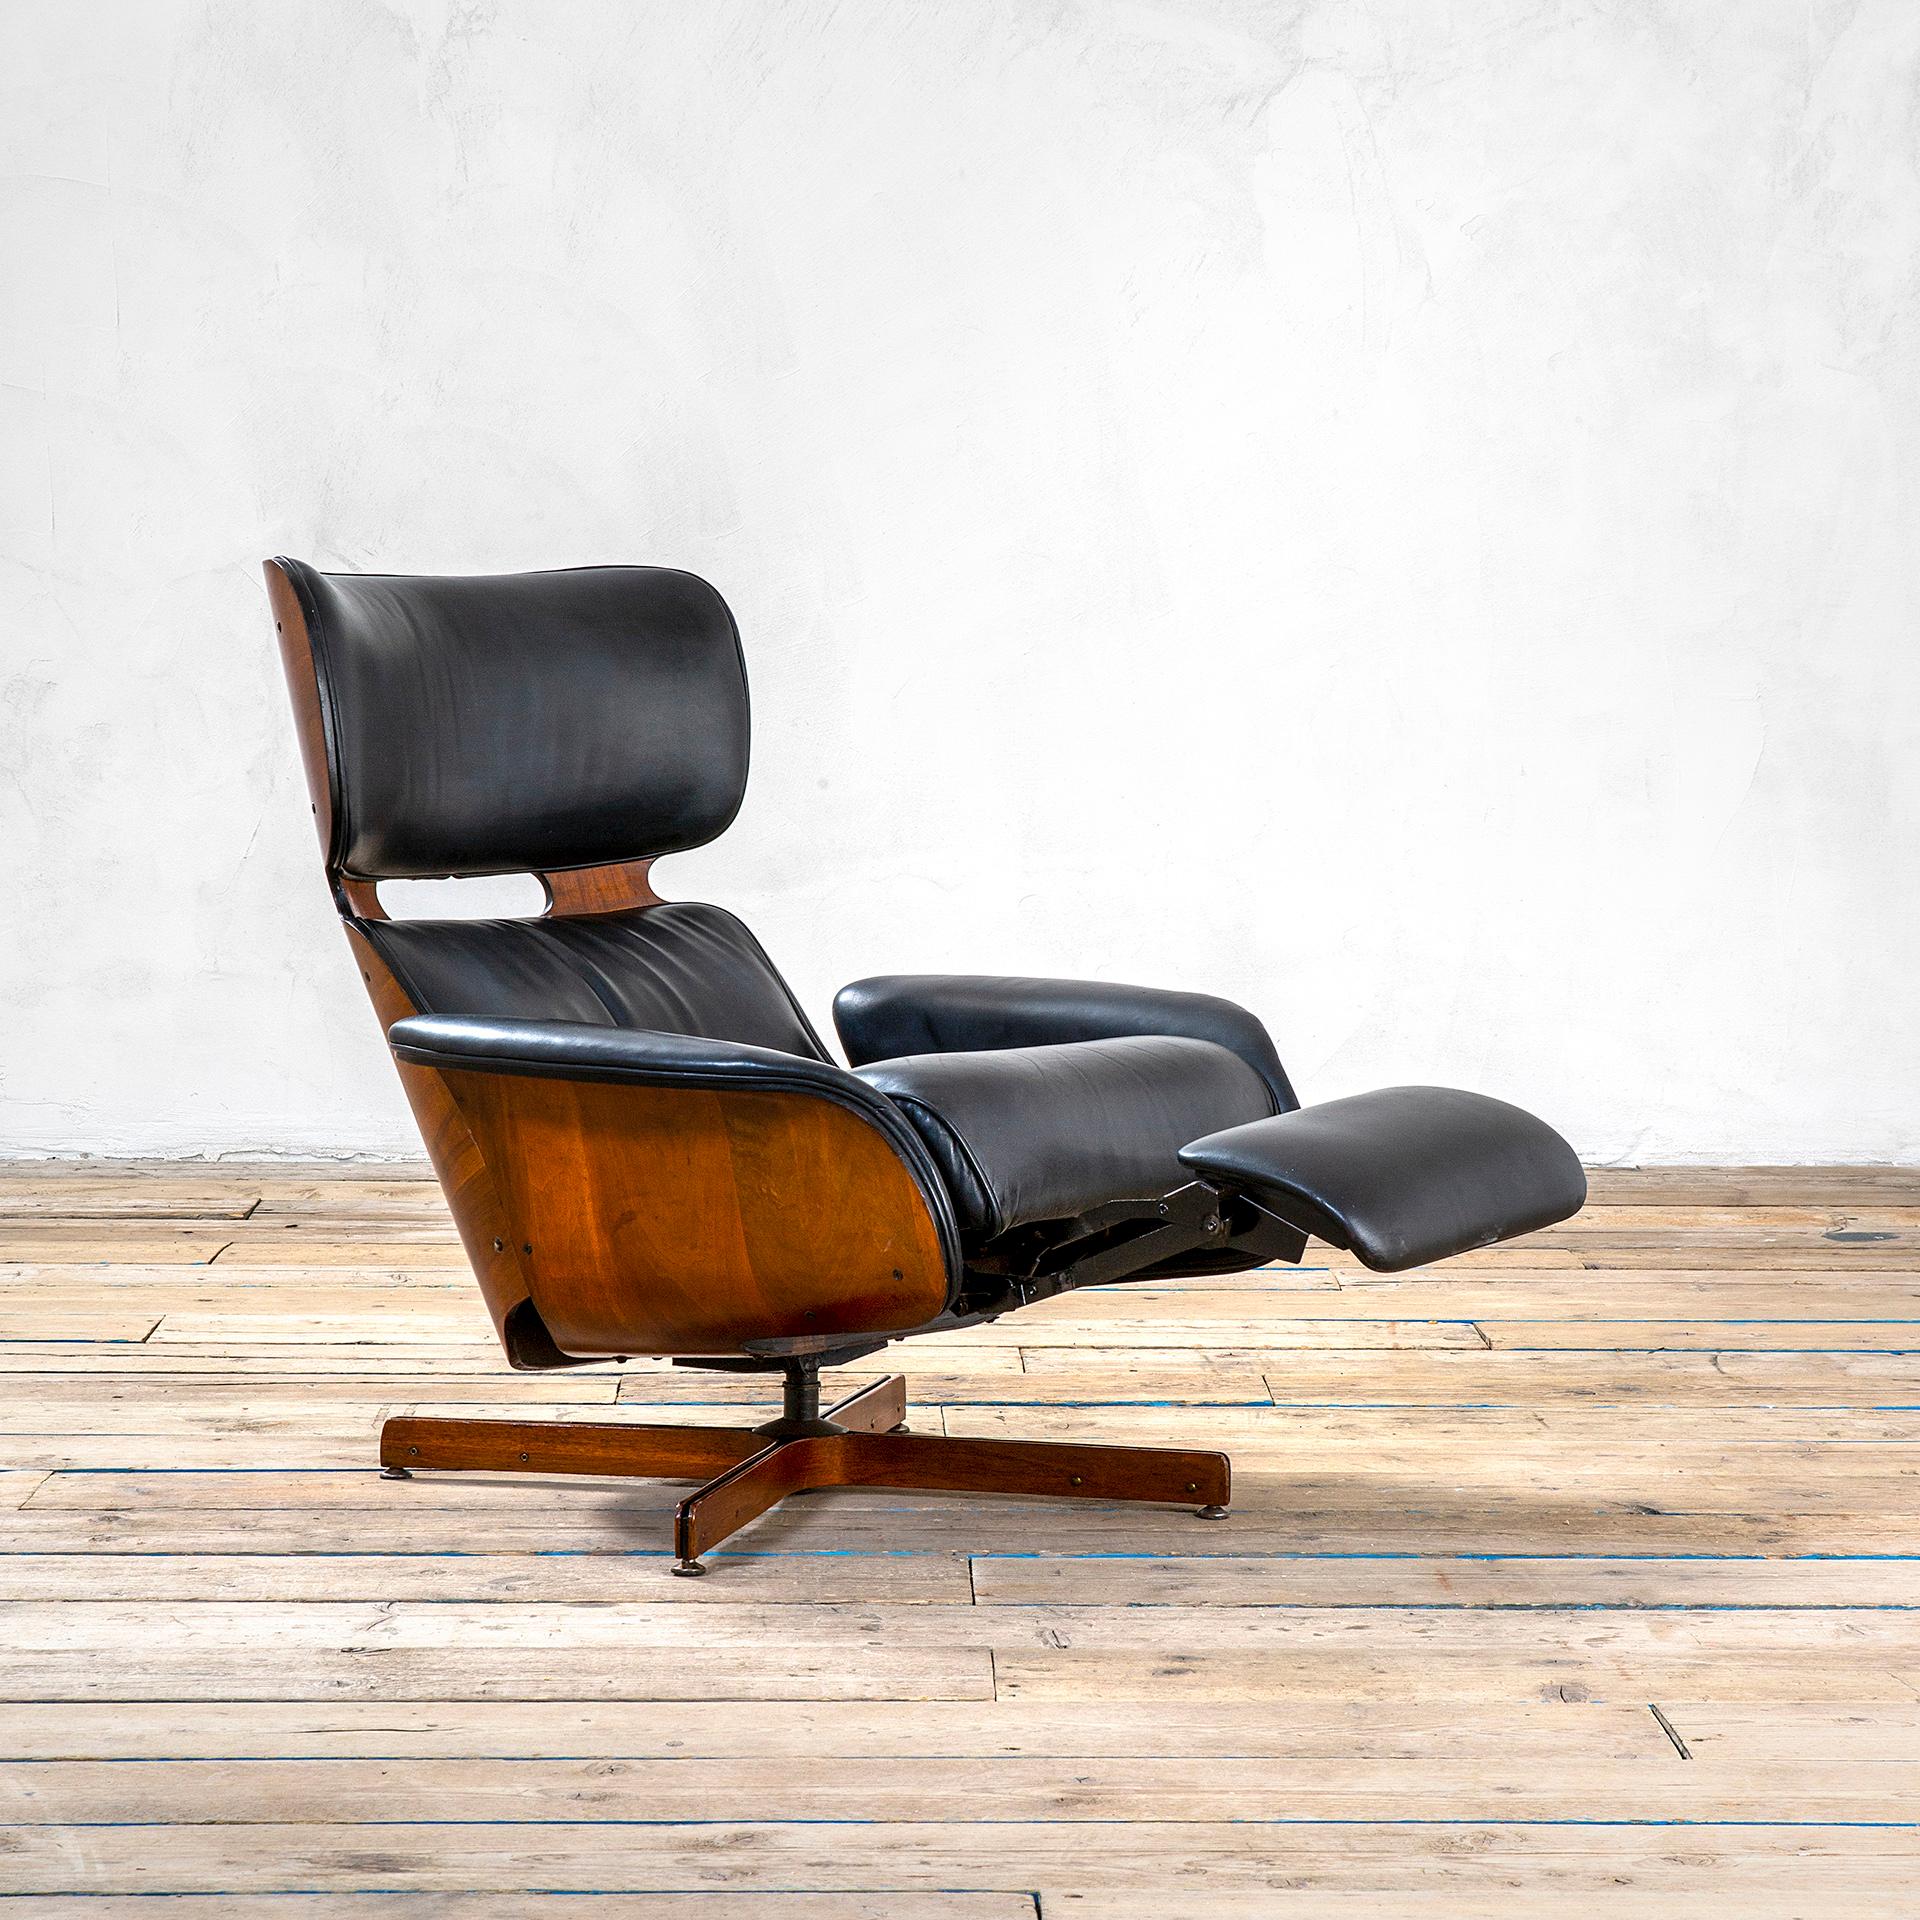 George Mulhauser, born in 1922, was known for his pioneering molded plywood designs and iconic lounge chairs. Graduating in 1953 from Pratt Institute with a degree in Industrial Design, Mulhauser quickly established himself as a staff designer in